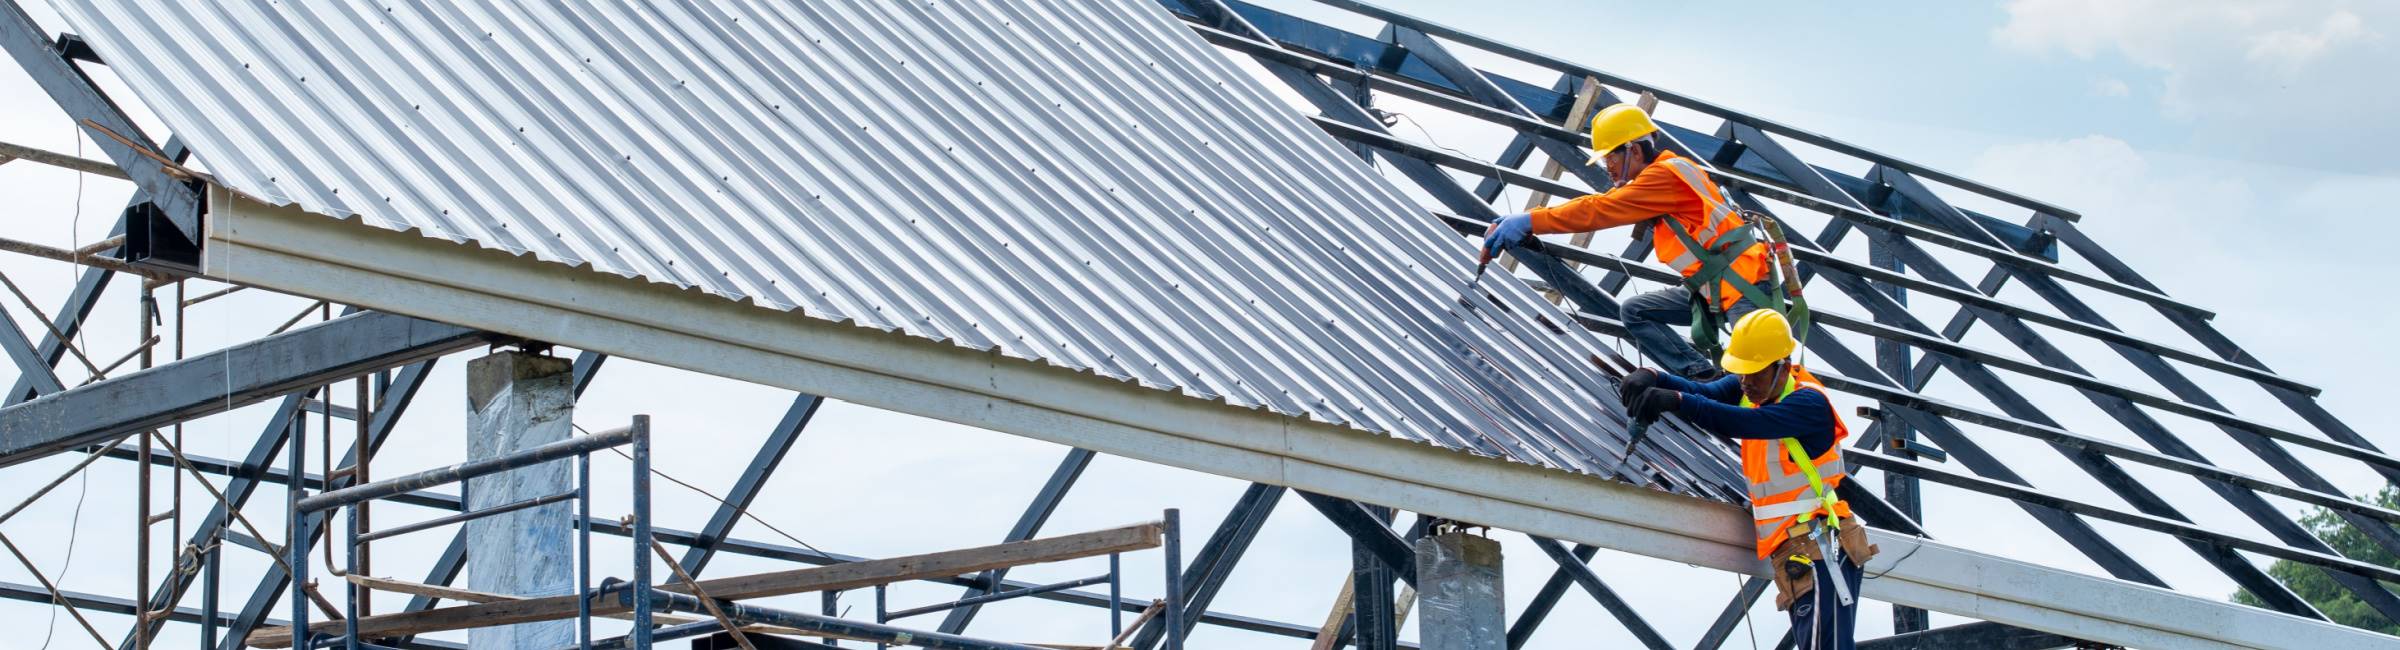 How To Choose A Reliable Commercial Roofing Contractor